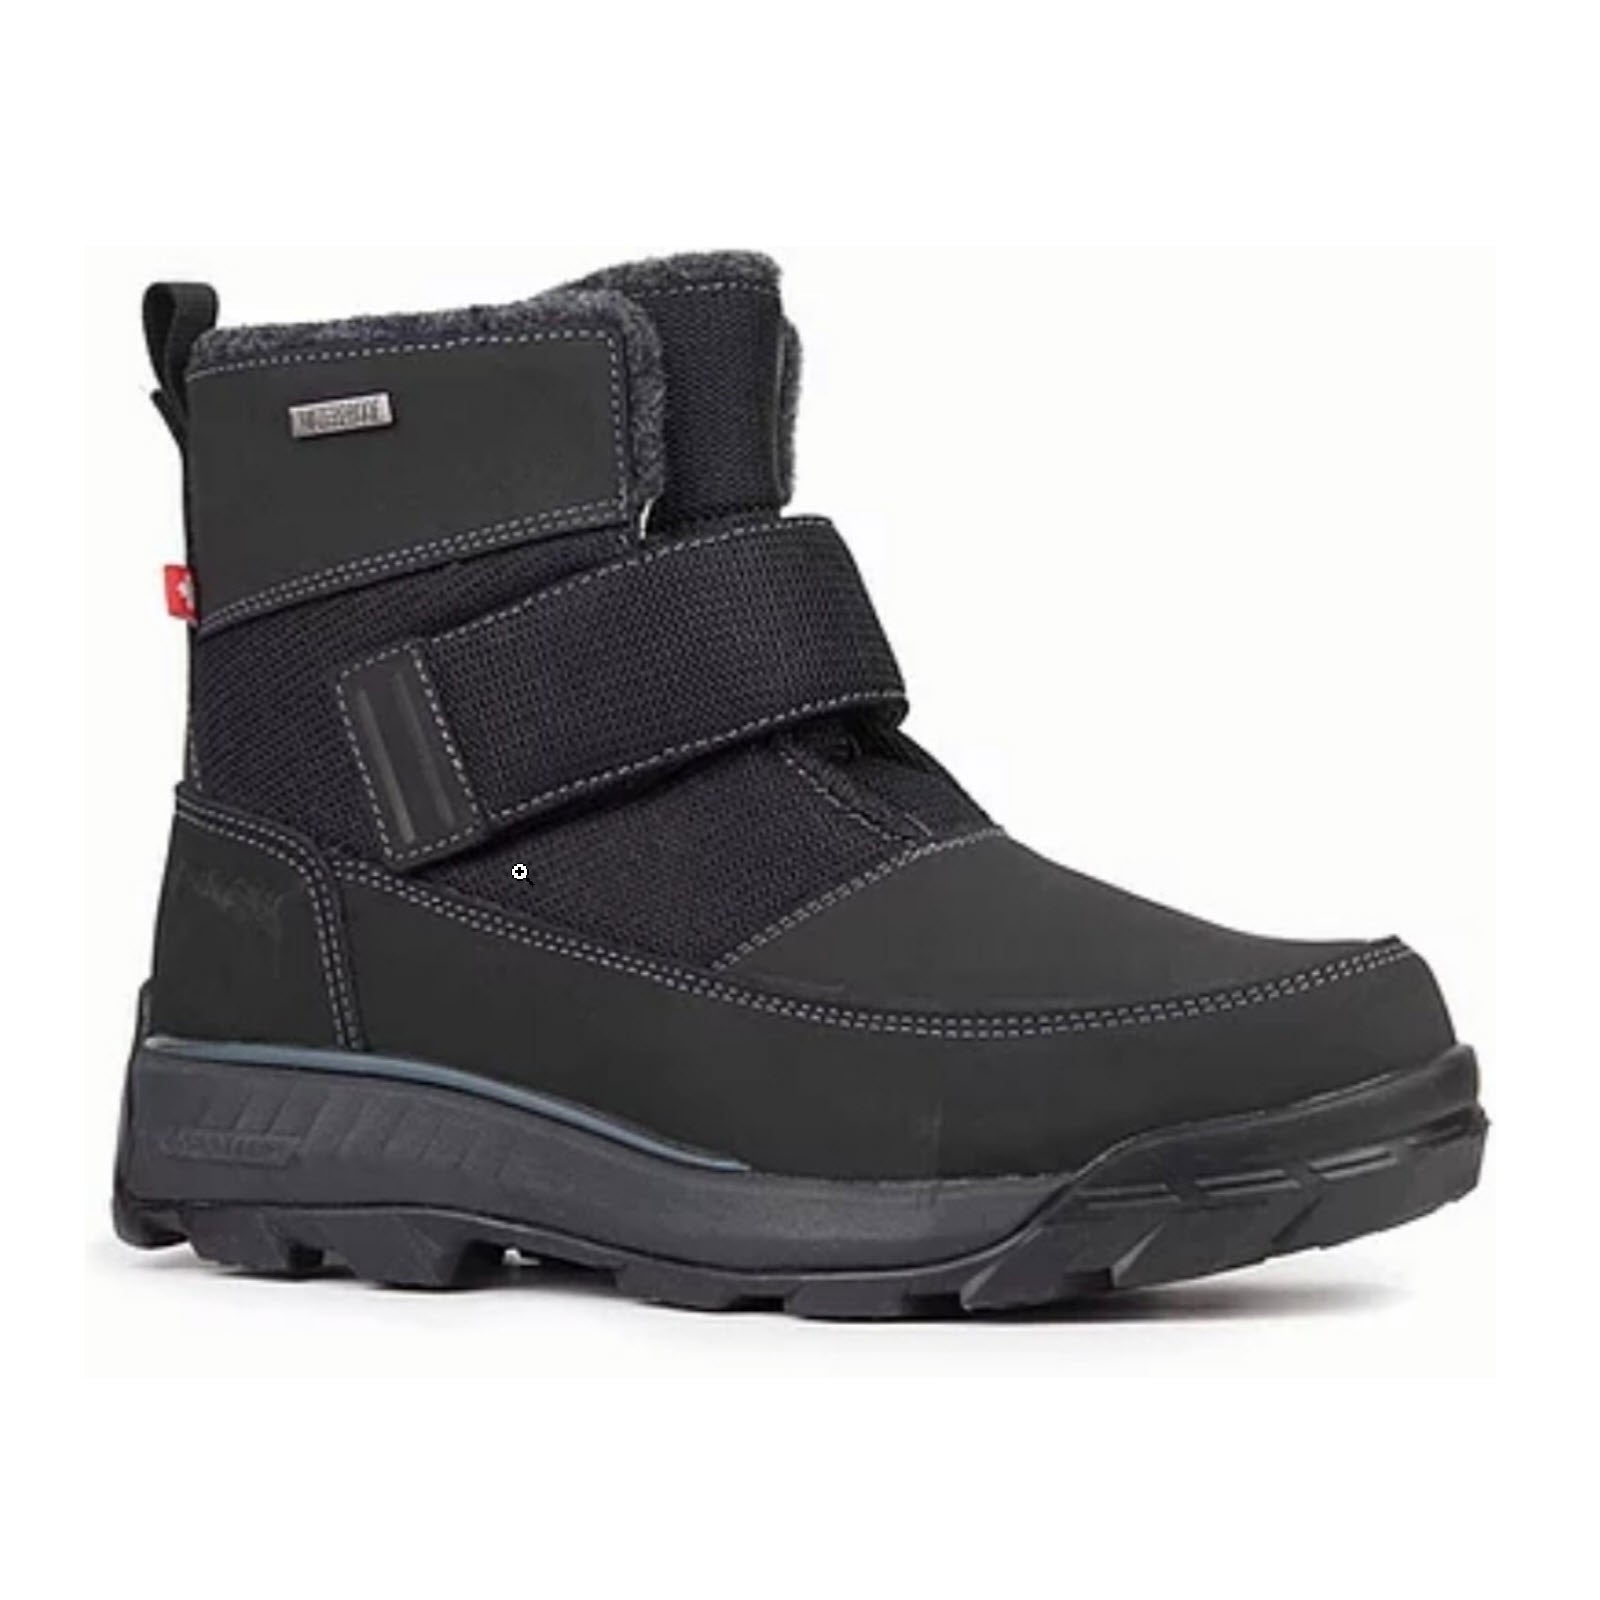 NexGrip Ice Jacob 3.0 Black men's winter boot with velcro straps and a thick rubber sole, isolated on a white background.